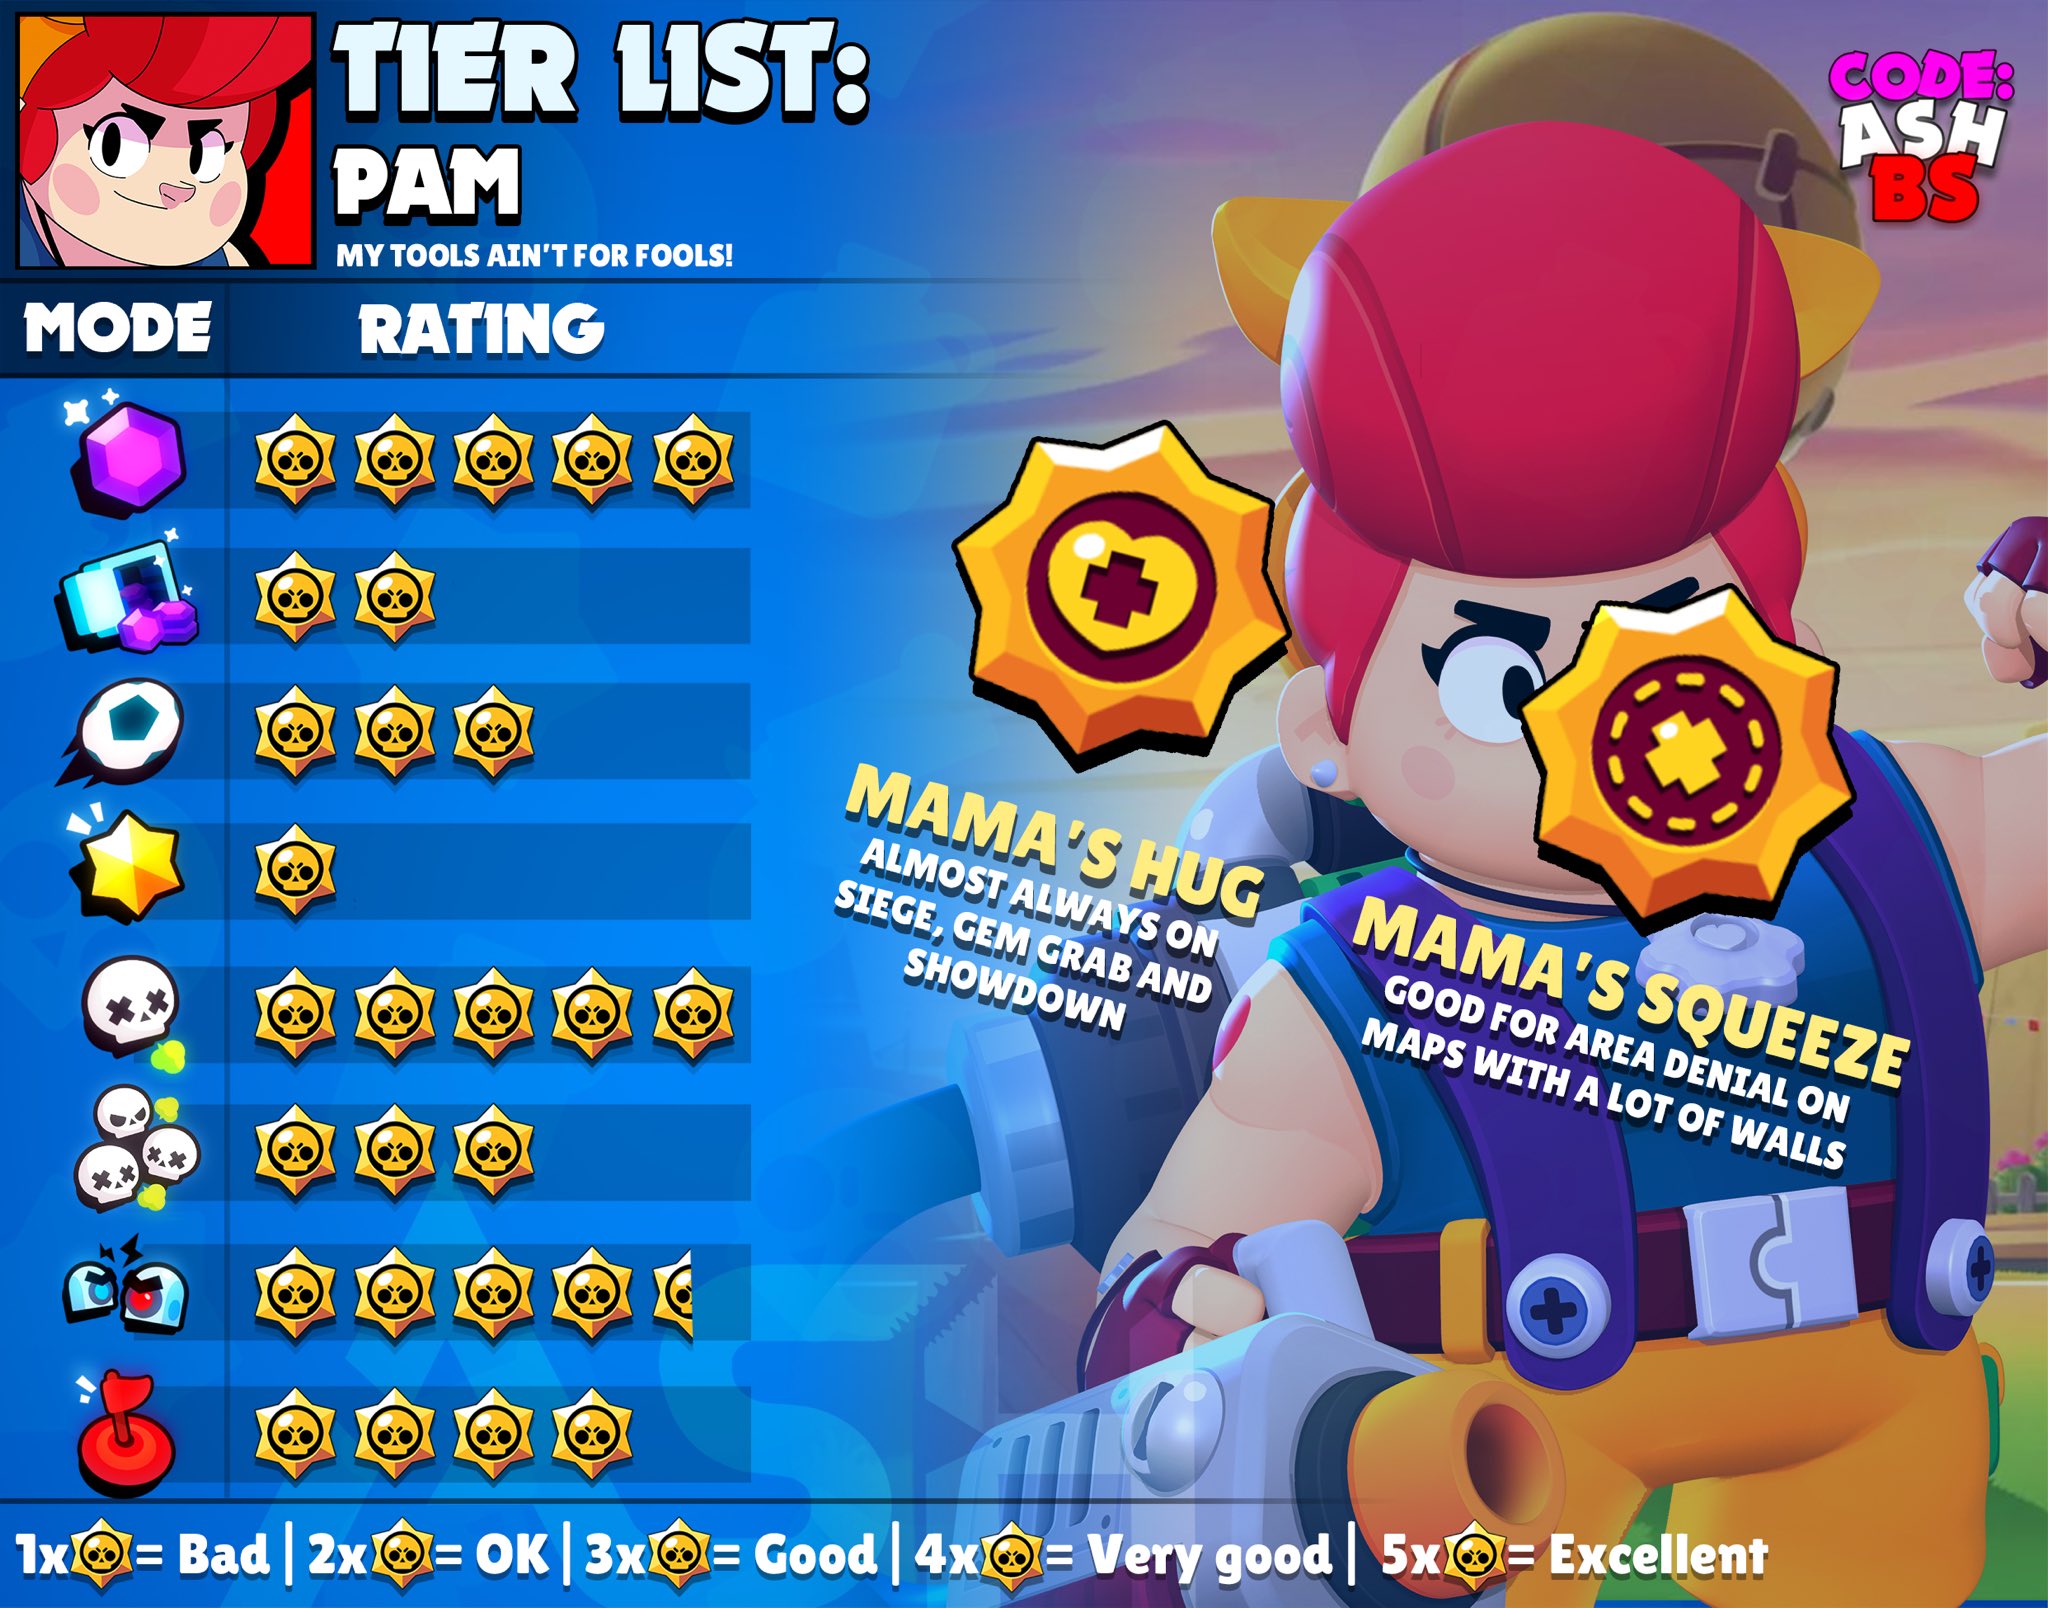 Code Ashbs On Twitter Pam Tier List For Every Game Mode And The Best Maps To Use Her In With Suggested Comps Which Brawler Should I Do Next Pam Brawlstars Https T Co S1tzcq9ja4